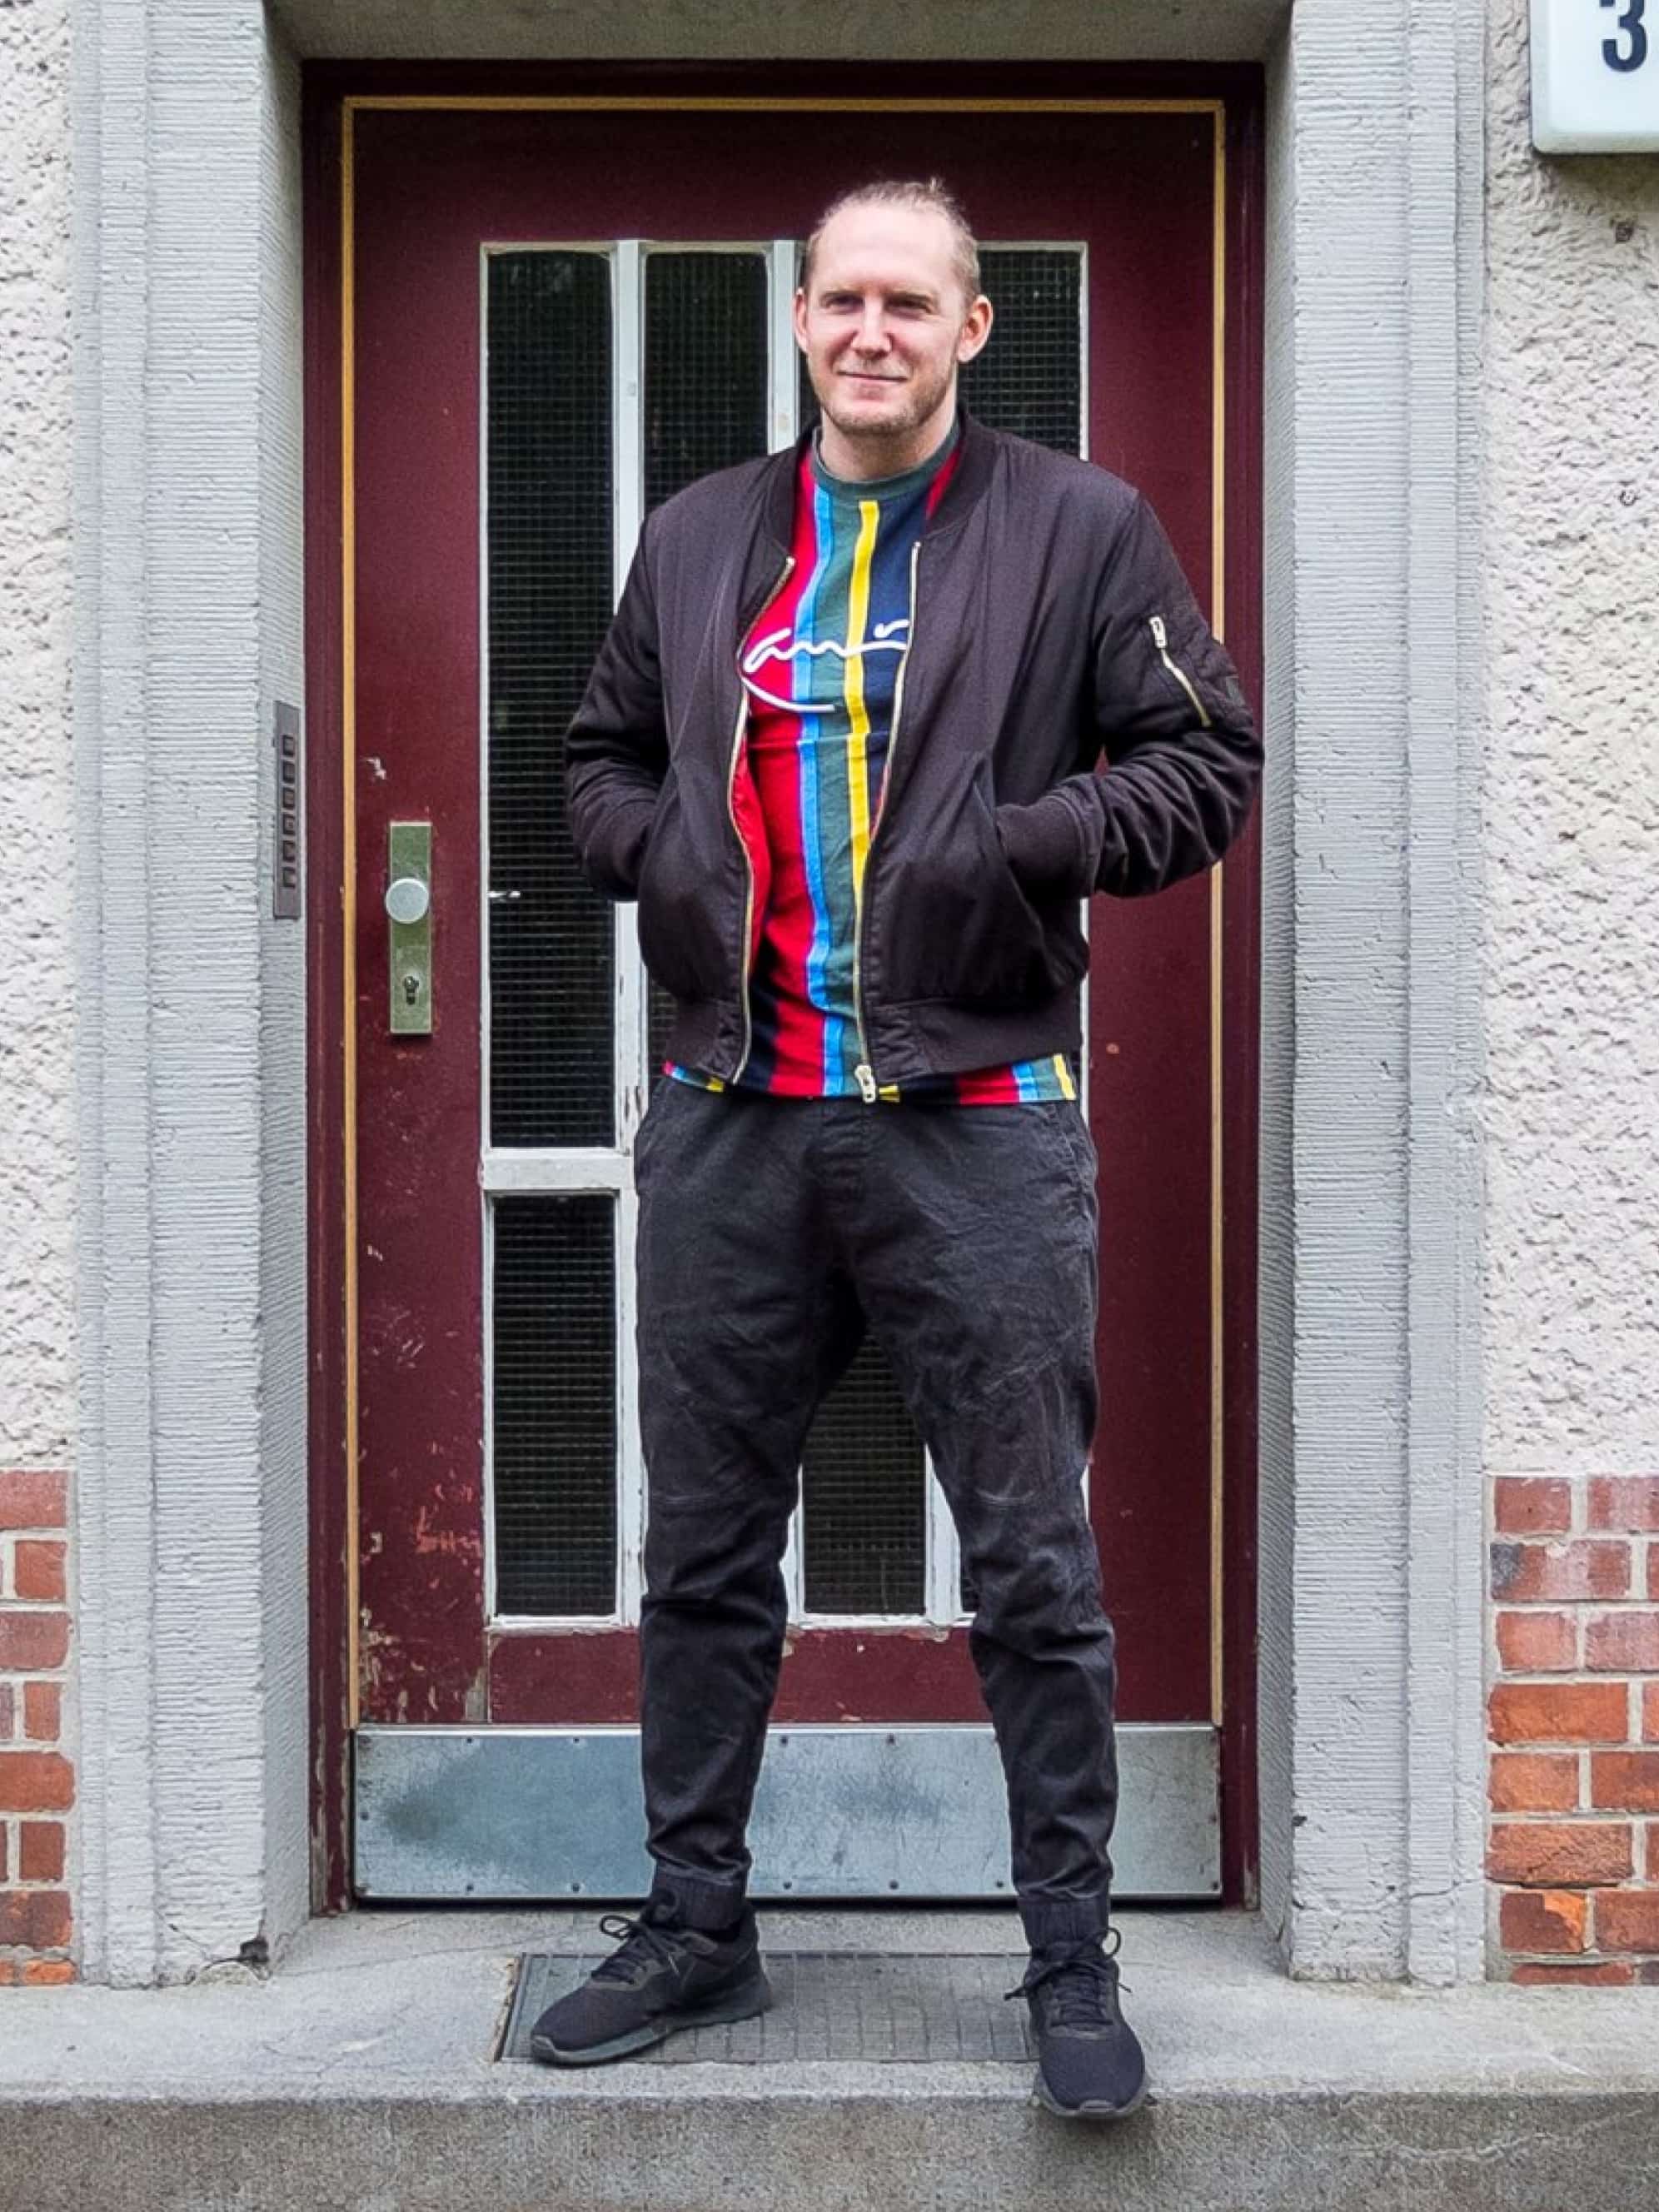 A man in a colorful sweater stands in front of a front door.